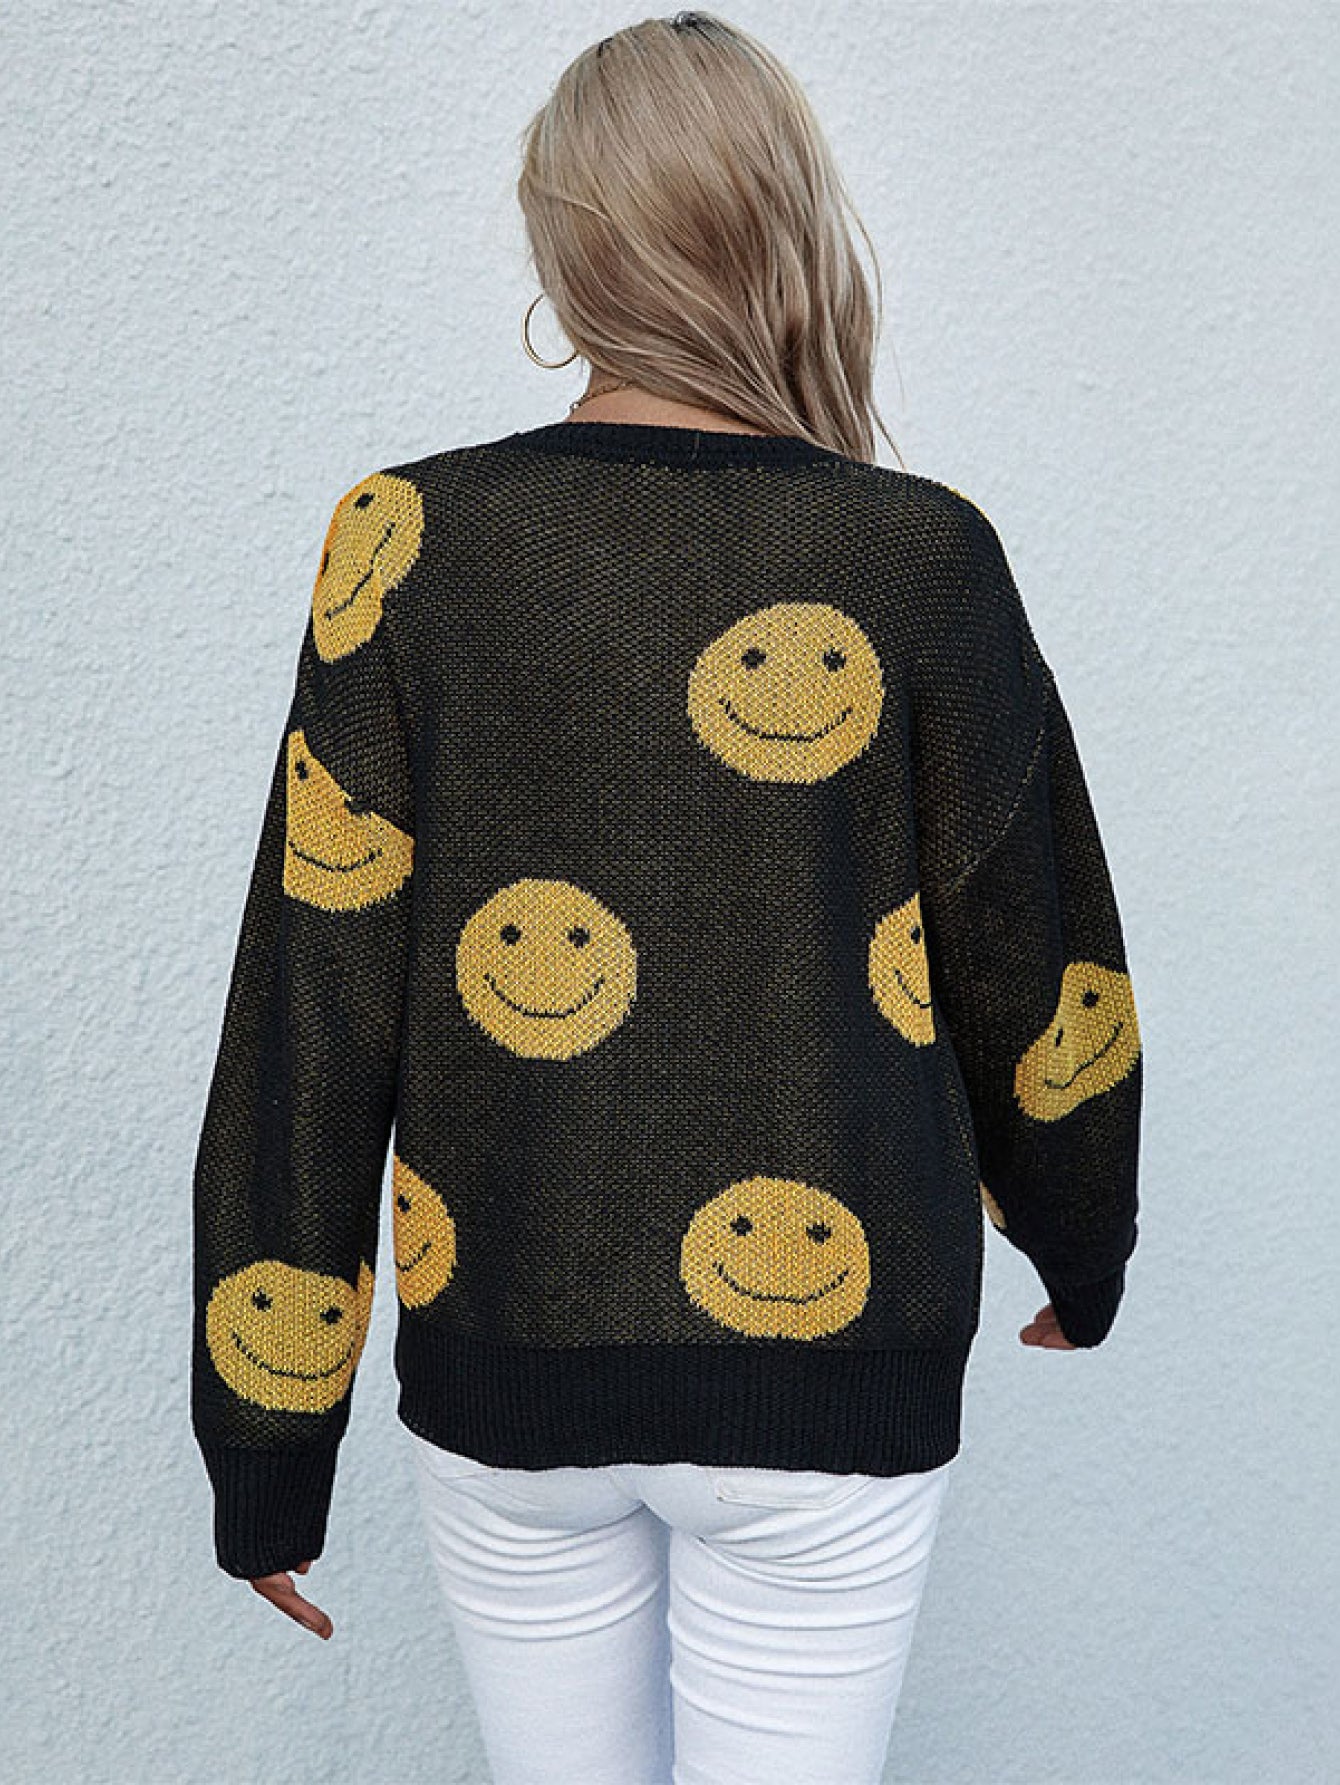 Women's Smiley Face Sweater